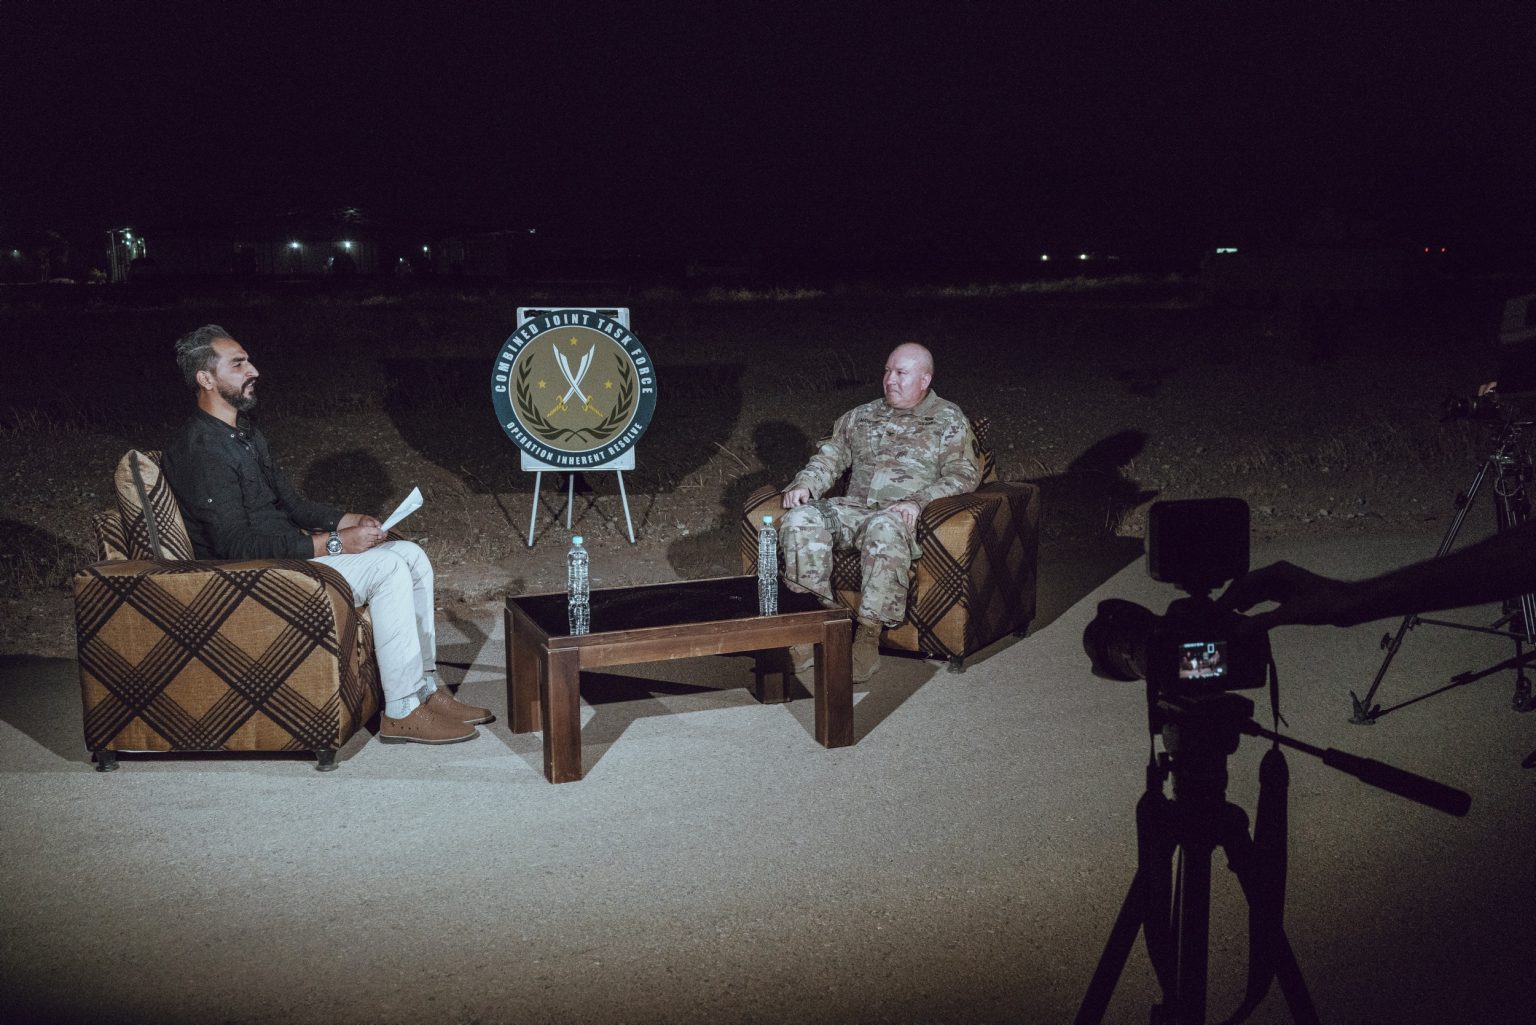 SYRIA. August 25, 2021 - U.S. Army Col. Wayne Marotto, spokesman for Operation Inherent Resolve, gives an interview to a local Syrian TV, inside a compound of a remote U.S. Army combat outpost in northeastern Syria, known as RLZ.